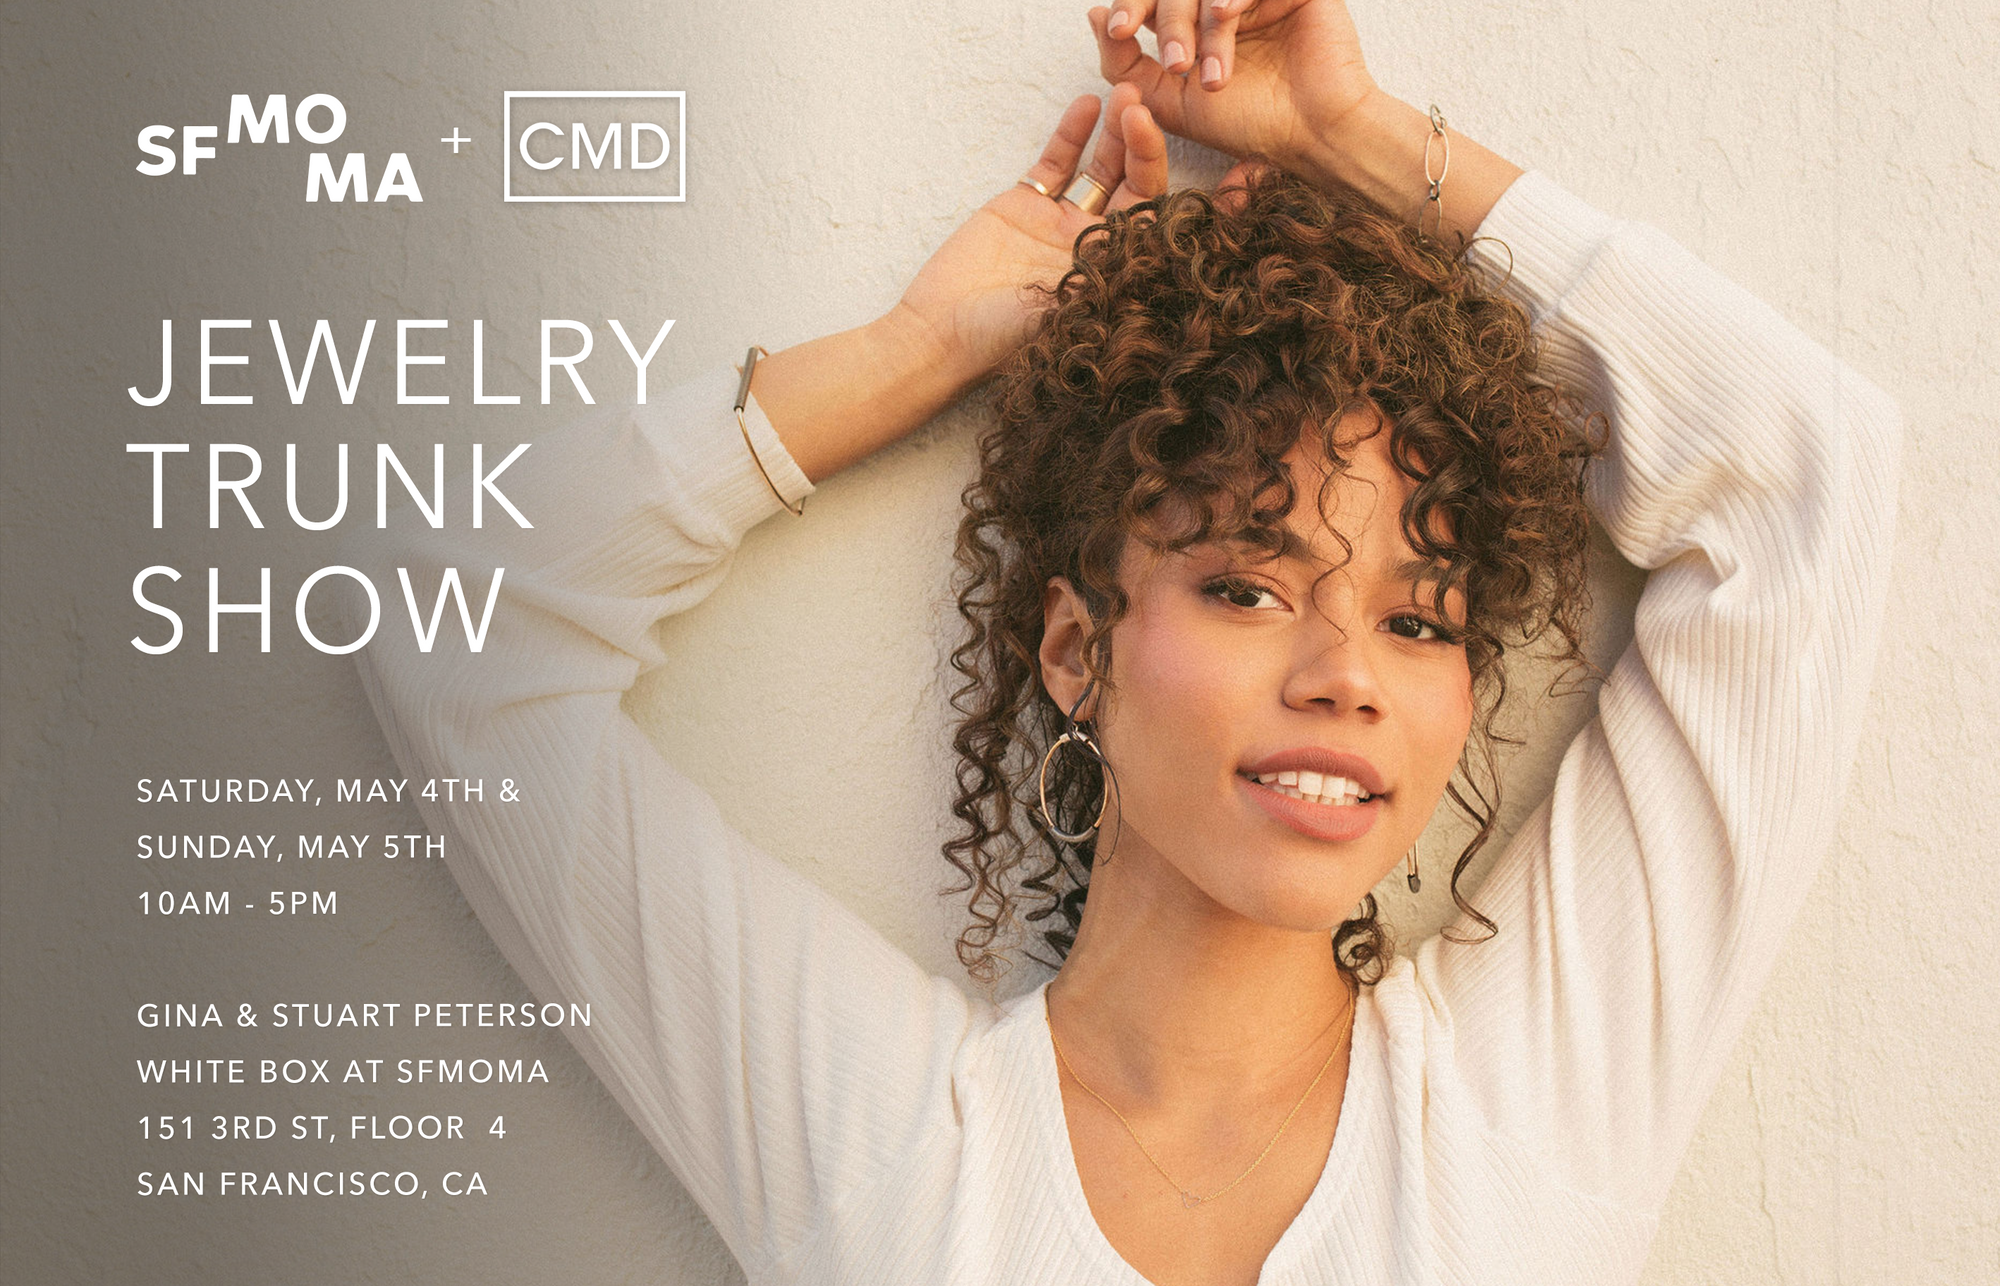 Sat. May 4th + Sun, May, 5th: Jewelry Trunk Show at SFMOMA